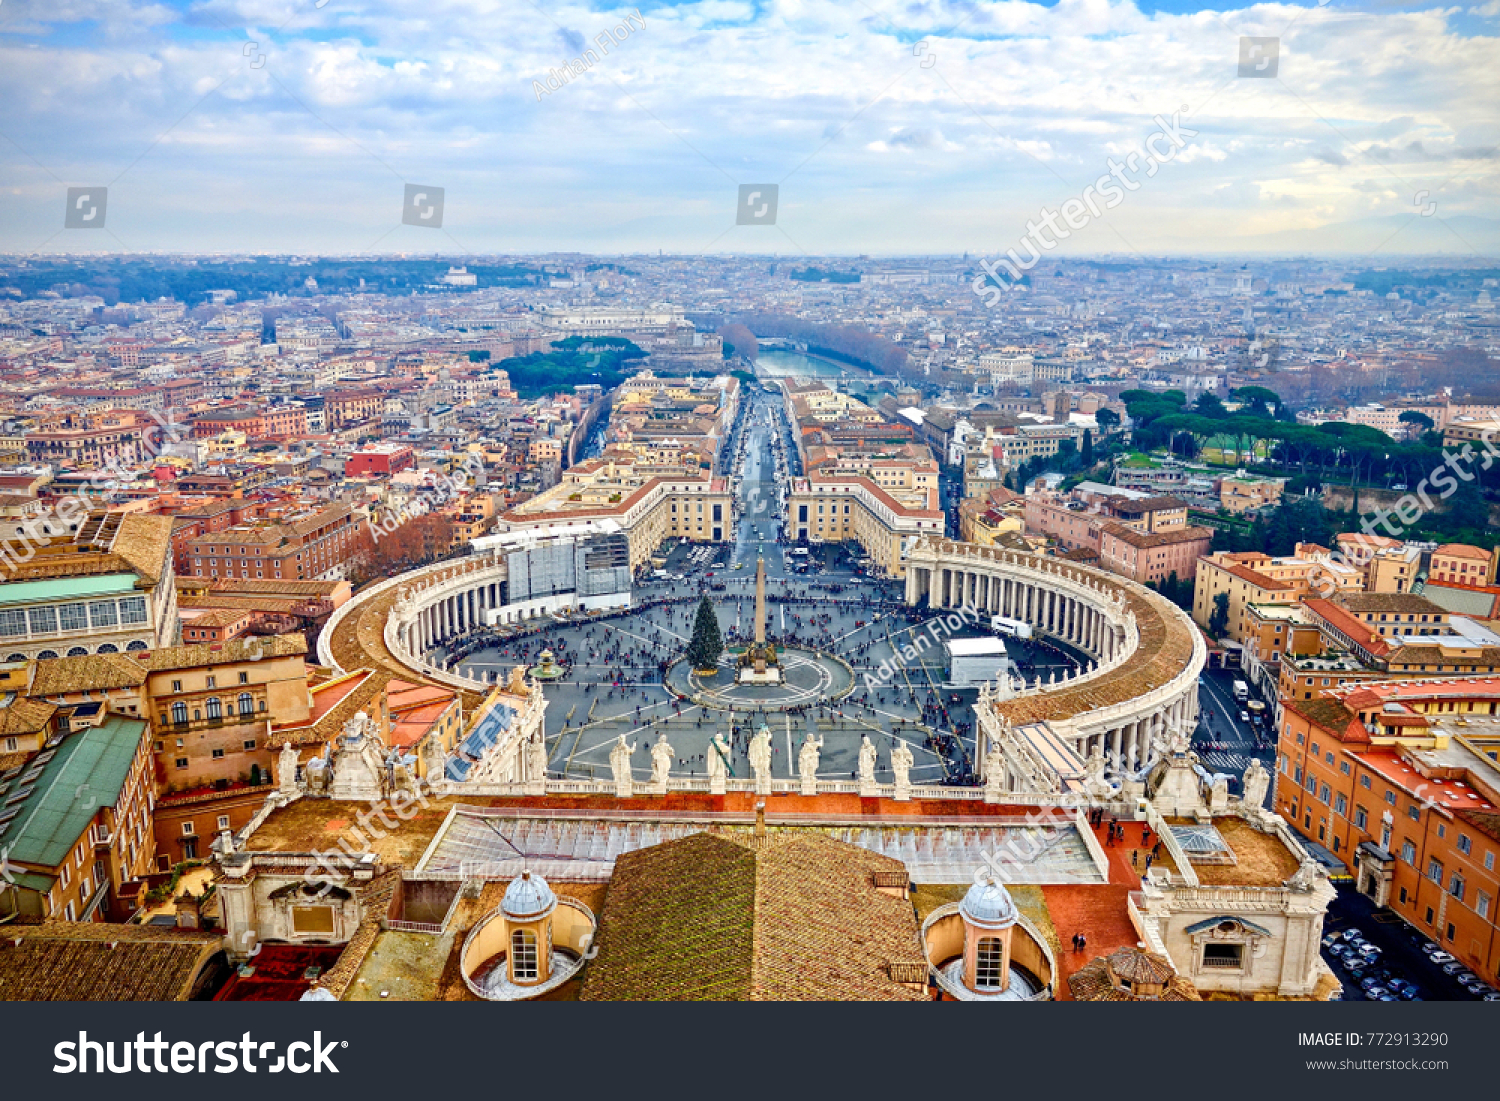 Saint Peters Square in the Vatican and an aerial view of the rooftops of Rome, Italy in a travel and tourism concept #772913290